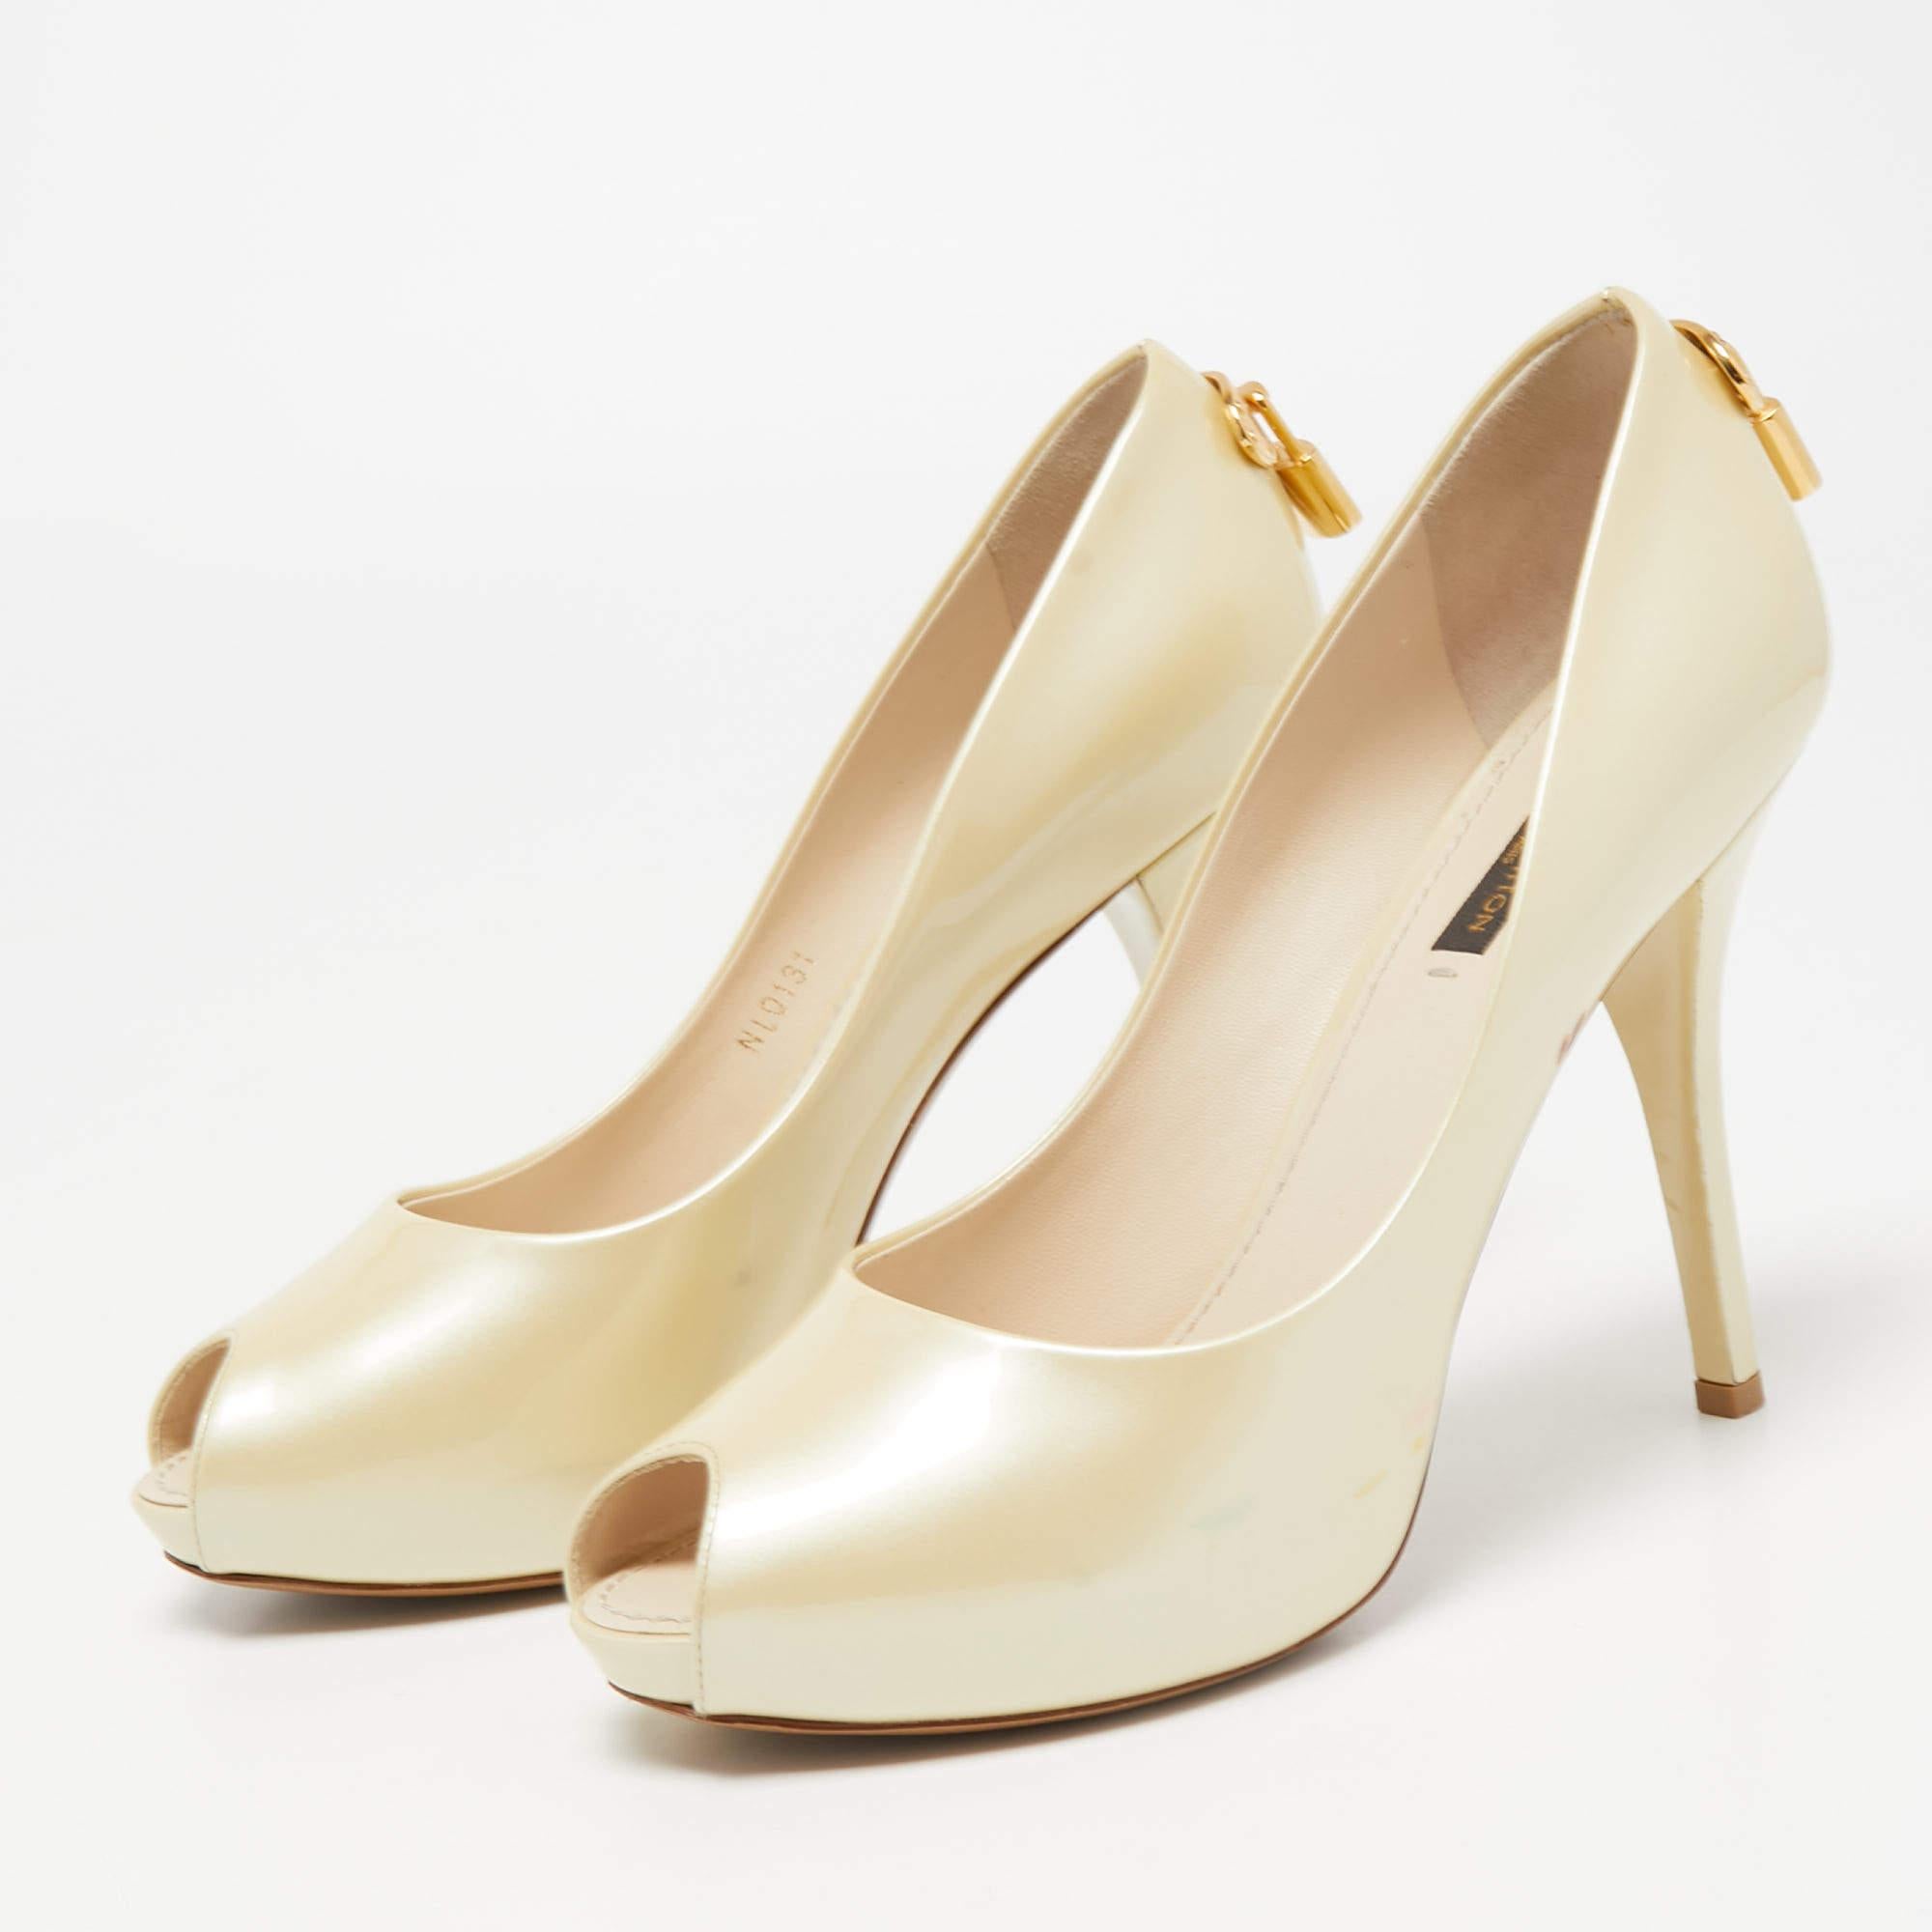 Louis Vuitton Cream Patent Leather Oh Really! Pumps Size 36.5 For Sale 2